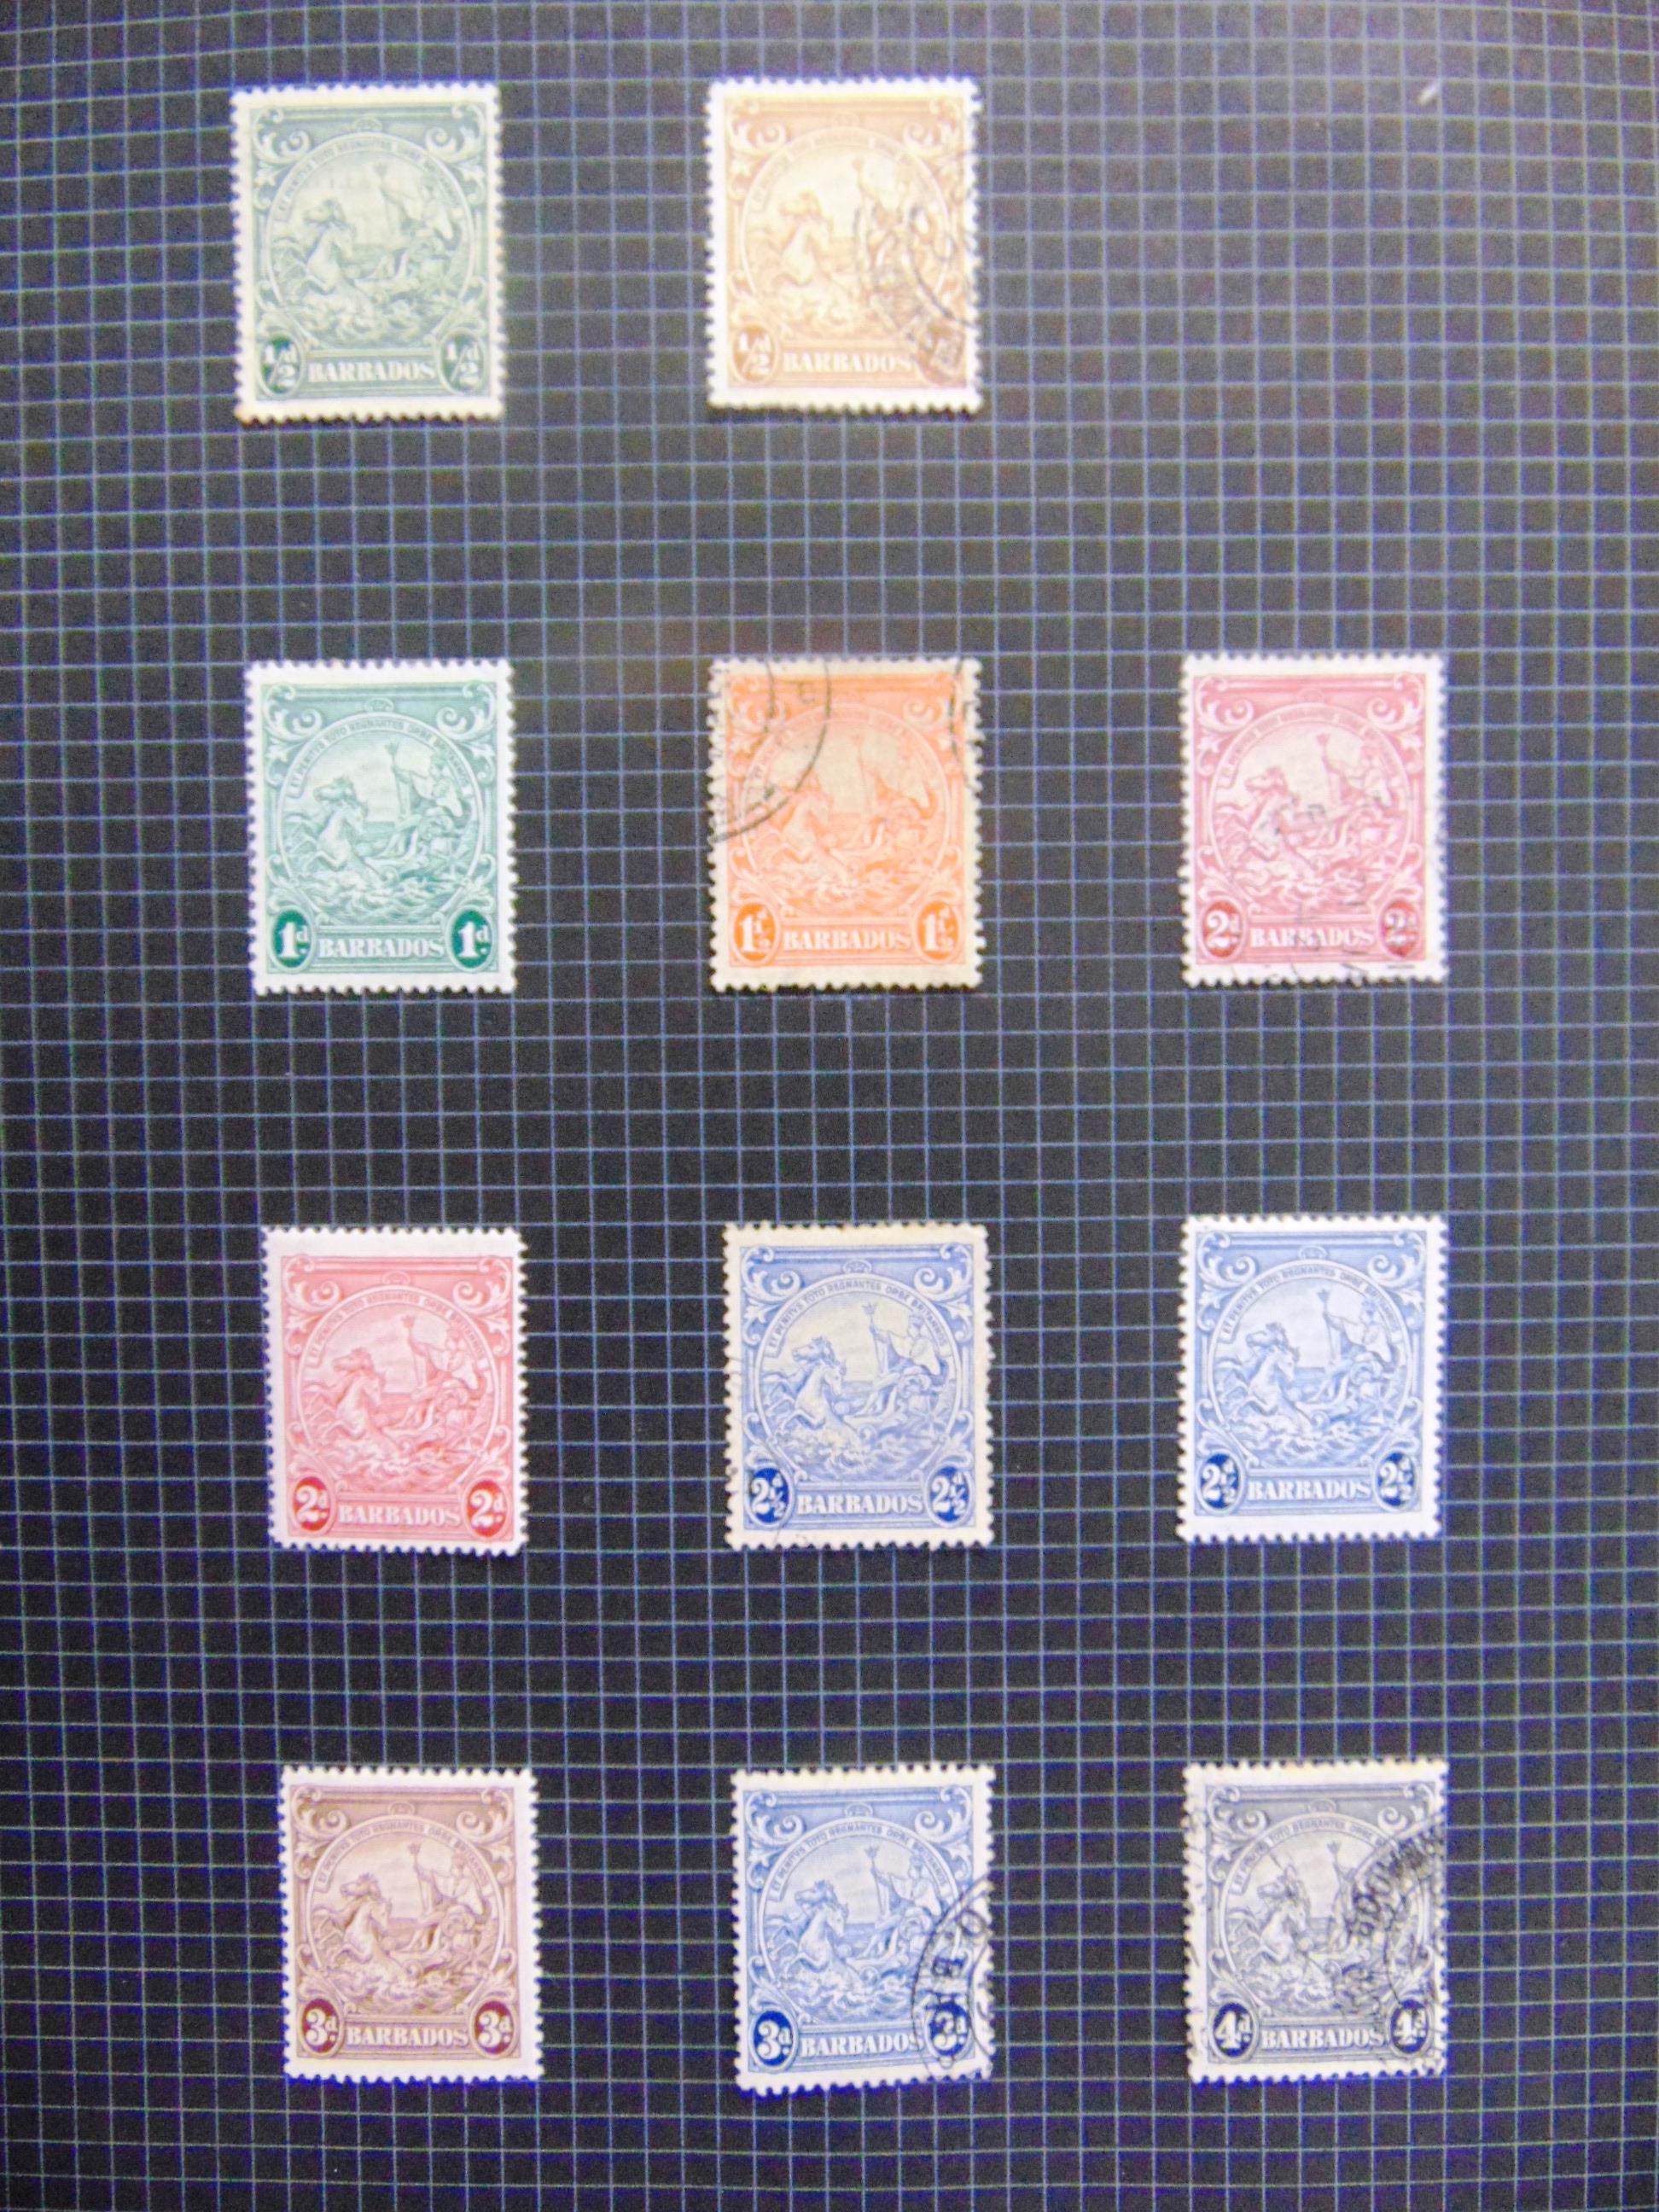 STAMPS - A BRITISH COMMONWEALTH COLLECTION Geo. VI - Eliz. II, mint and used, (three albums). - Image 2 of 4